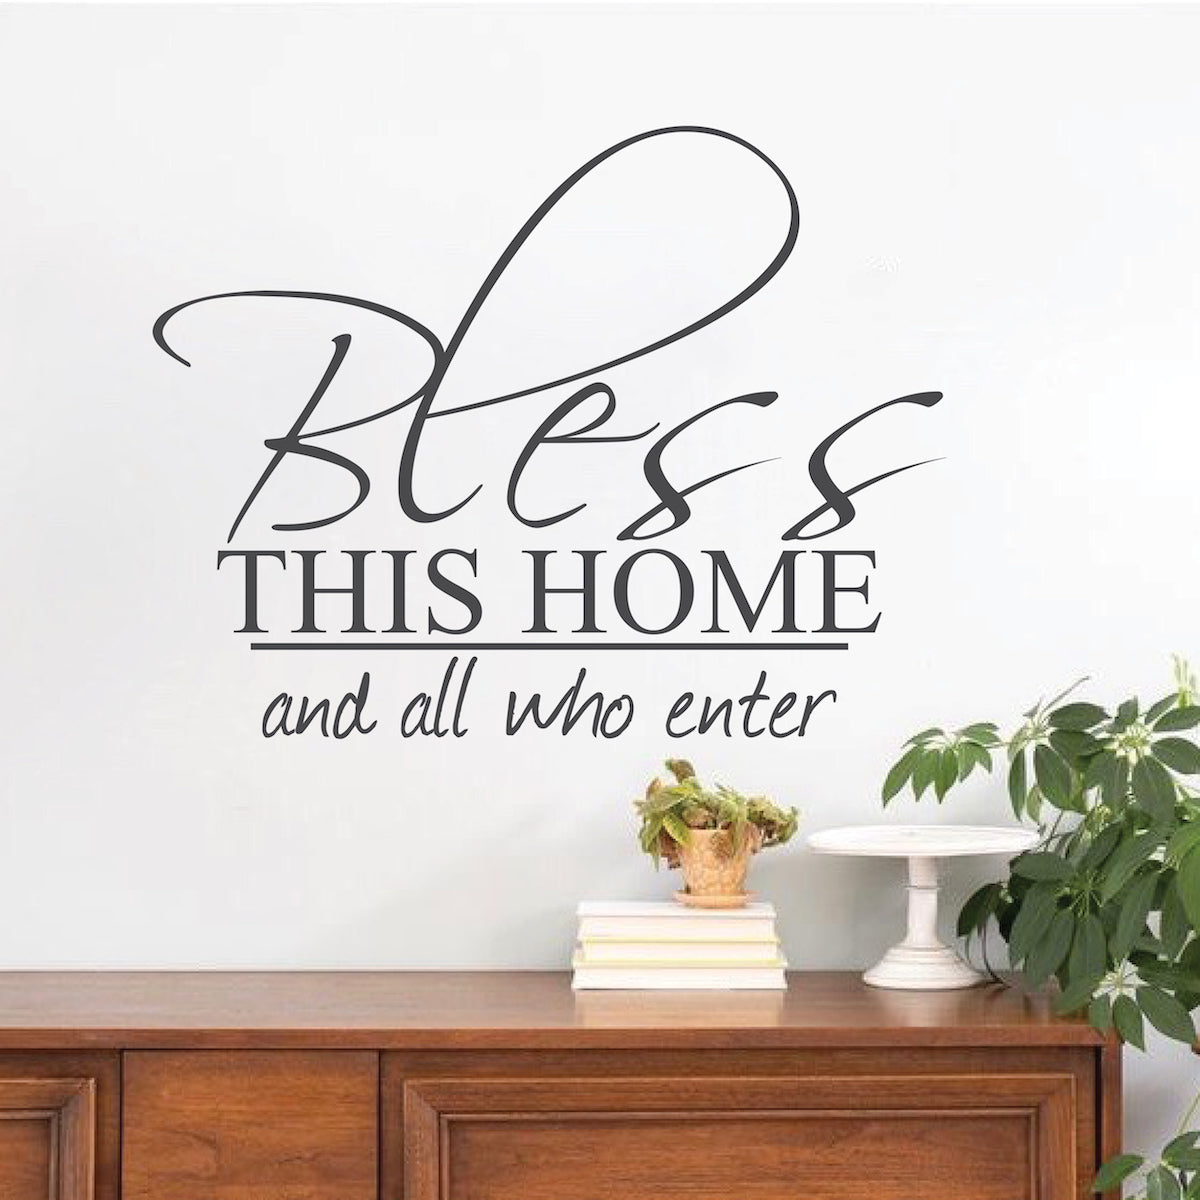 Bless This Home Wall Decal Saying